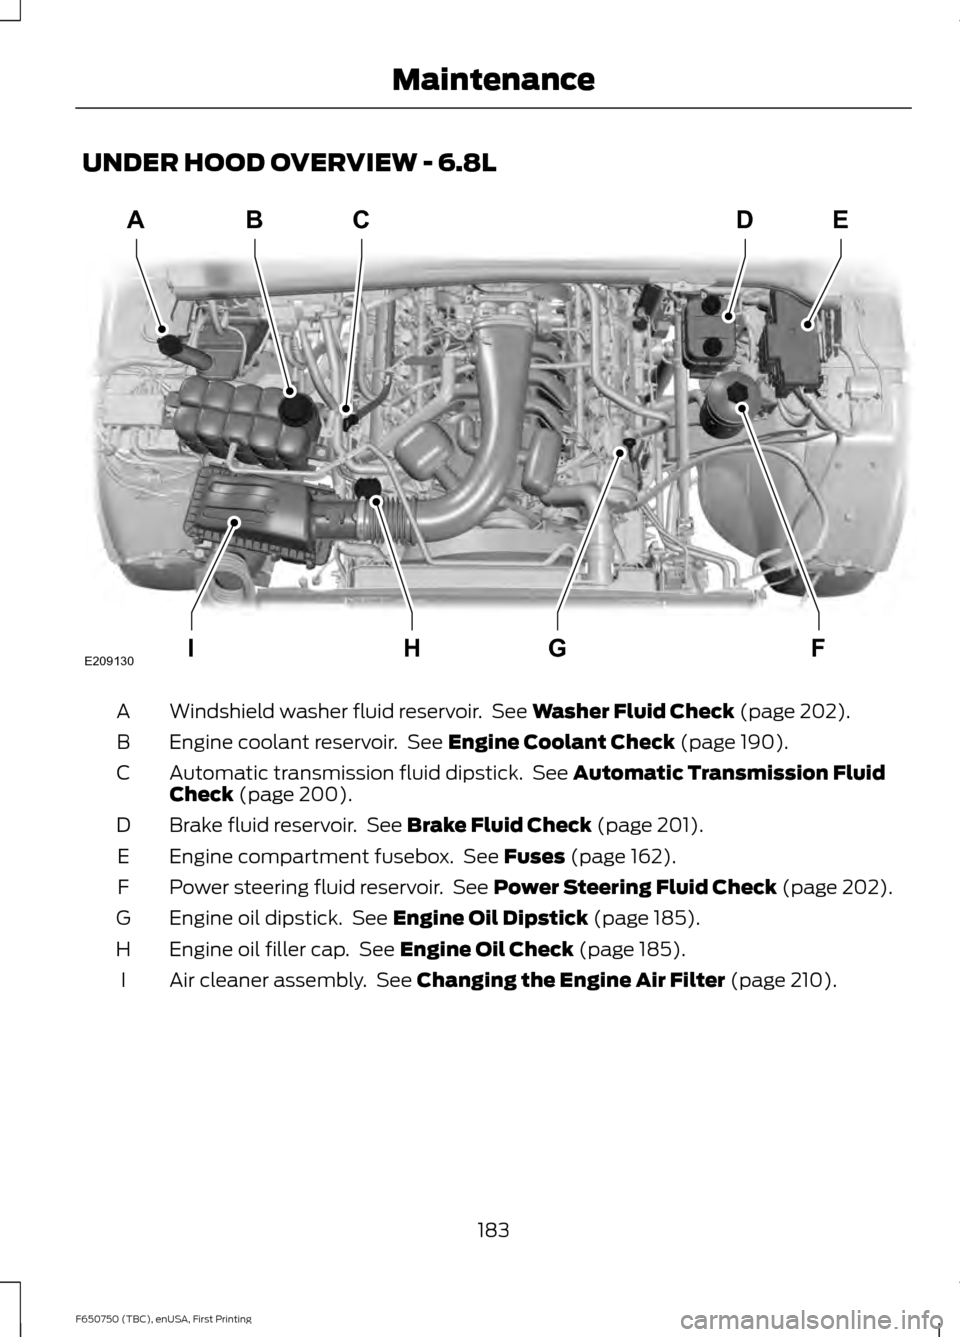 FORD F650 2016 13.G User Guide UNDER HOOD OVERVIEW - 6.8L
Windshield washer fluid reservoir.  See Washer Fluid Check (page 202).
A
Engine coolant reservoir.  See 
Engine Coolant Check (page 190).
B
Automatic transmission fluid dips